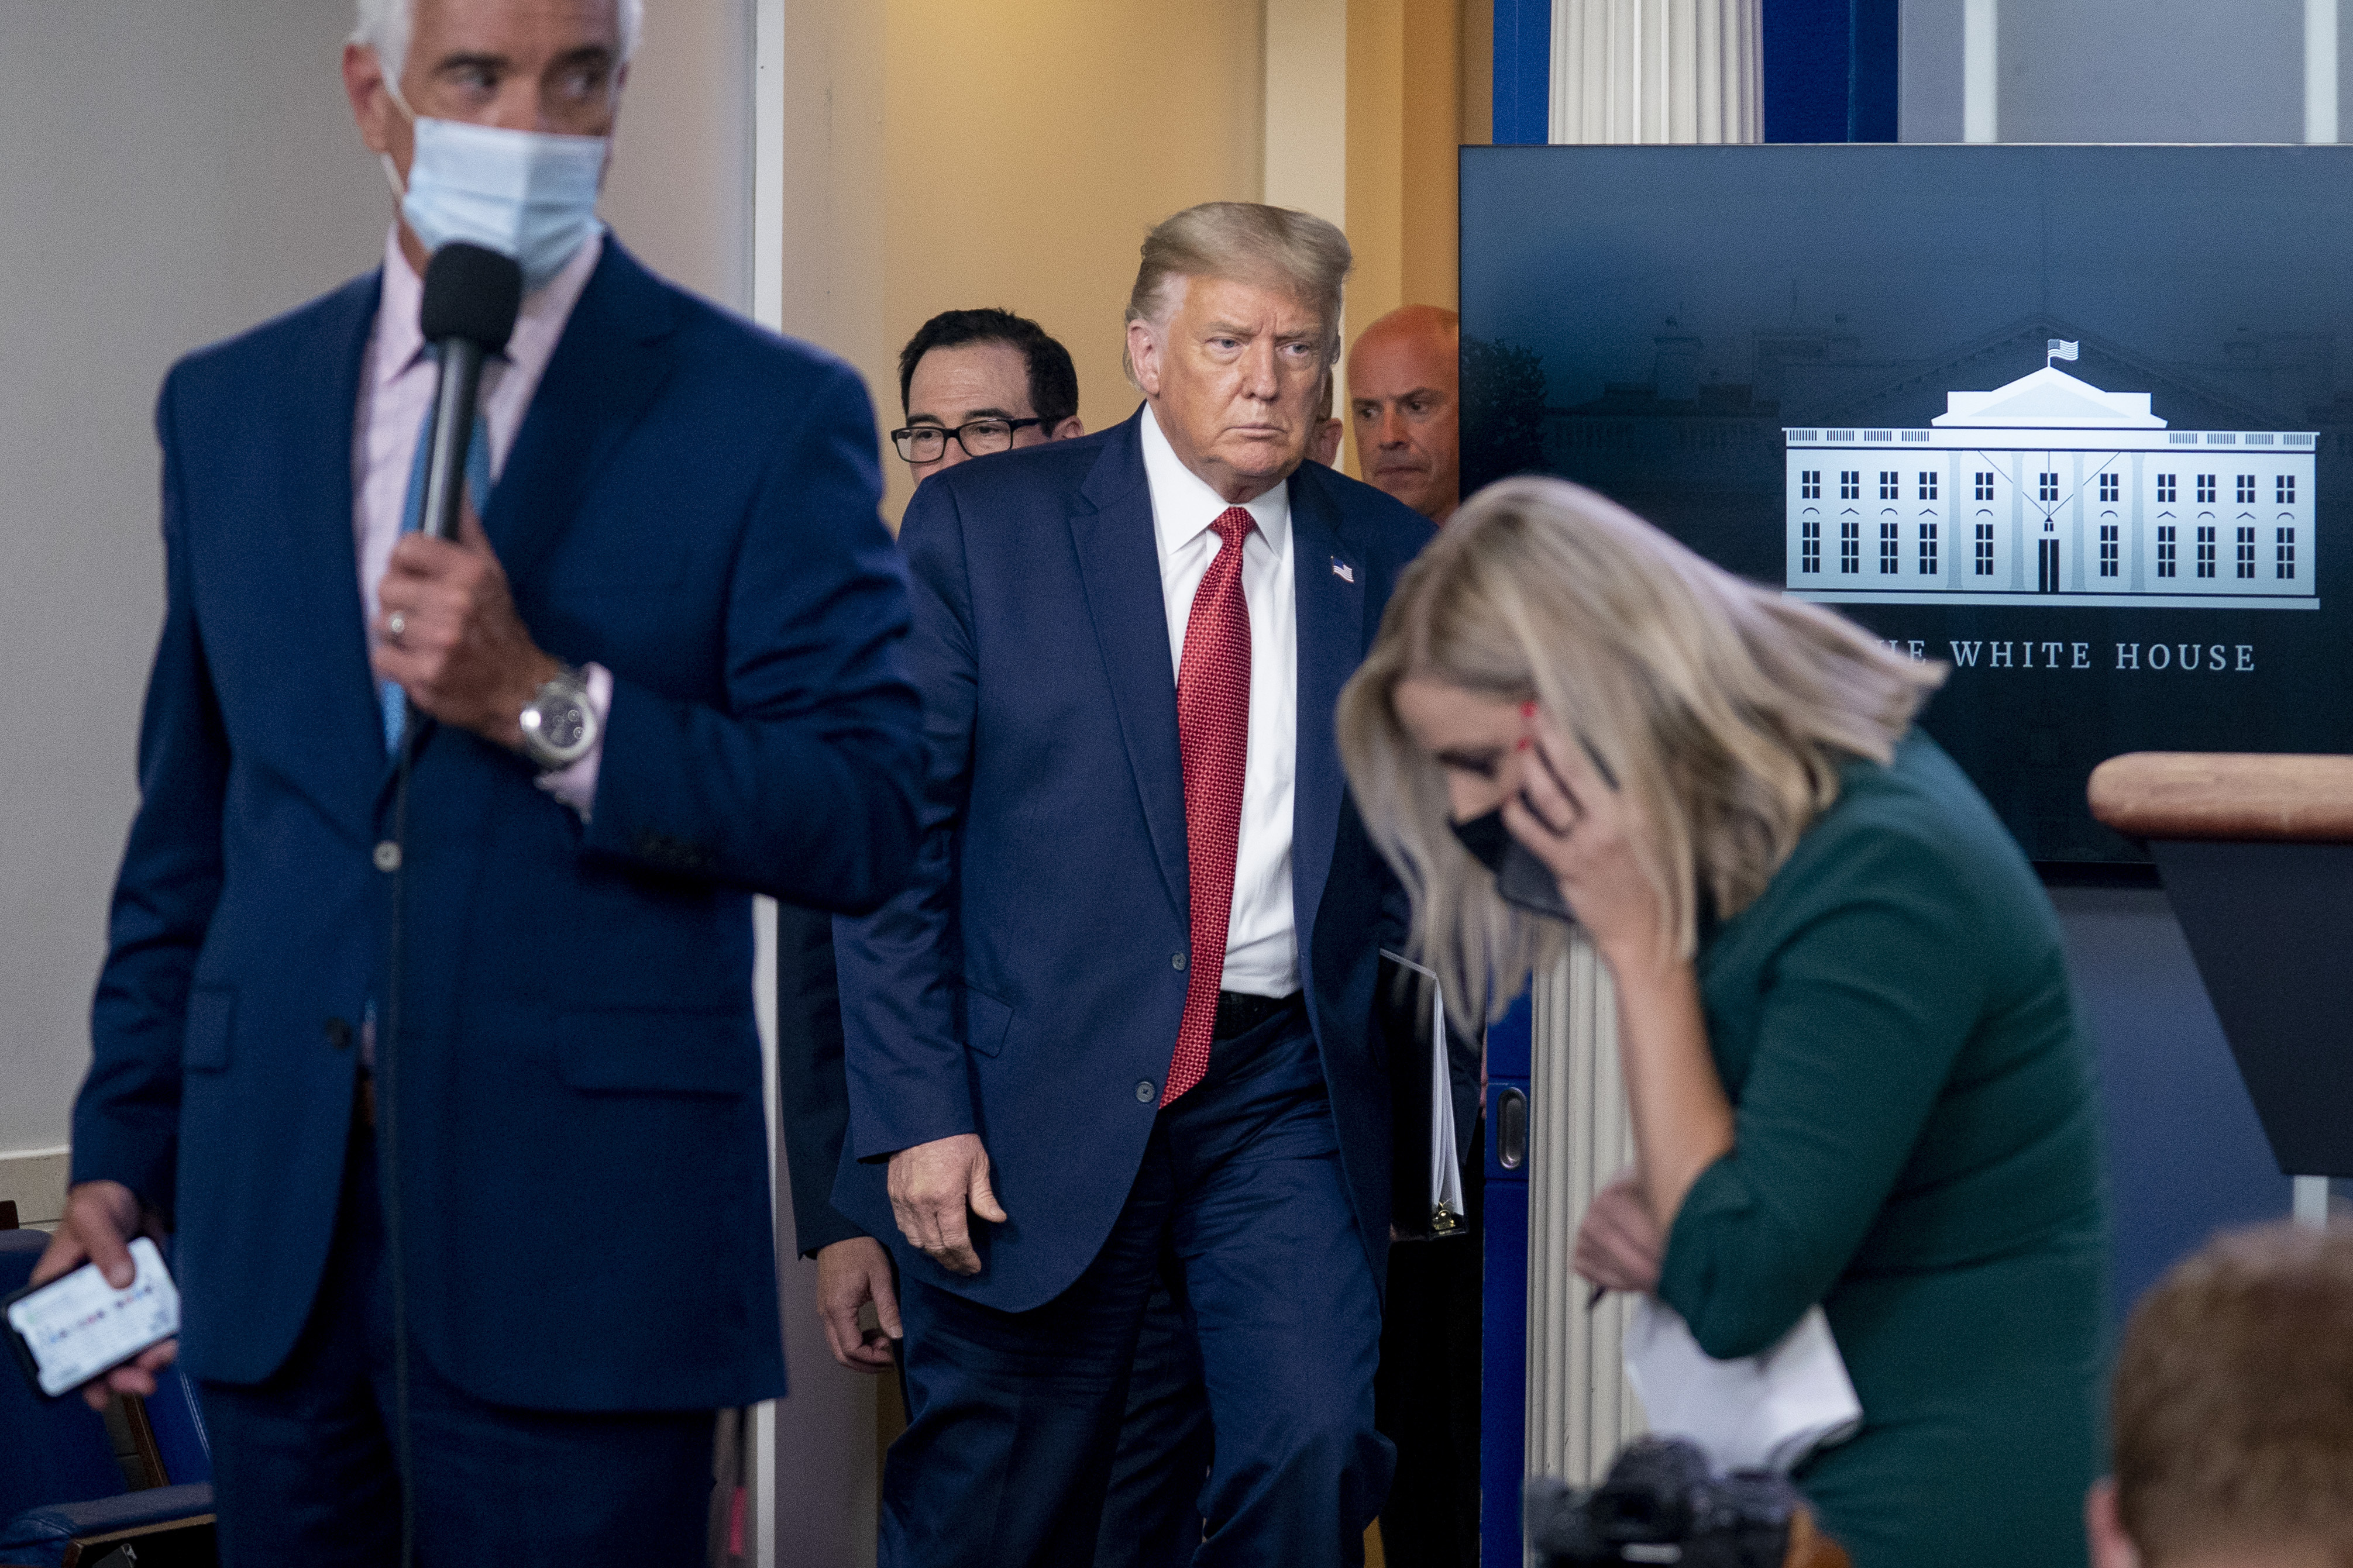 President Donald Trump returns to a news conference in the James Brady Press Briefing Room after he briefly left because of a security incident outside the fence of the White House, Monday, Aug. 10, 2020, in Washington. Photo: AP